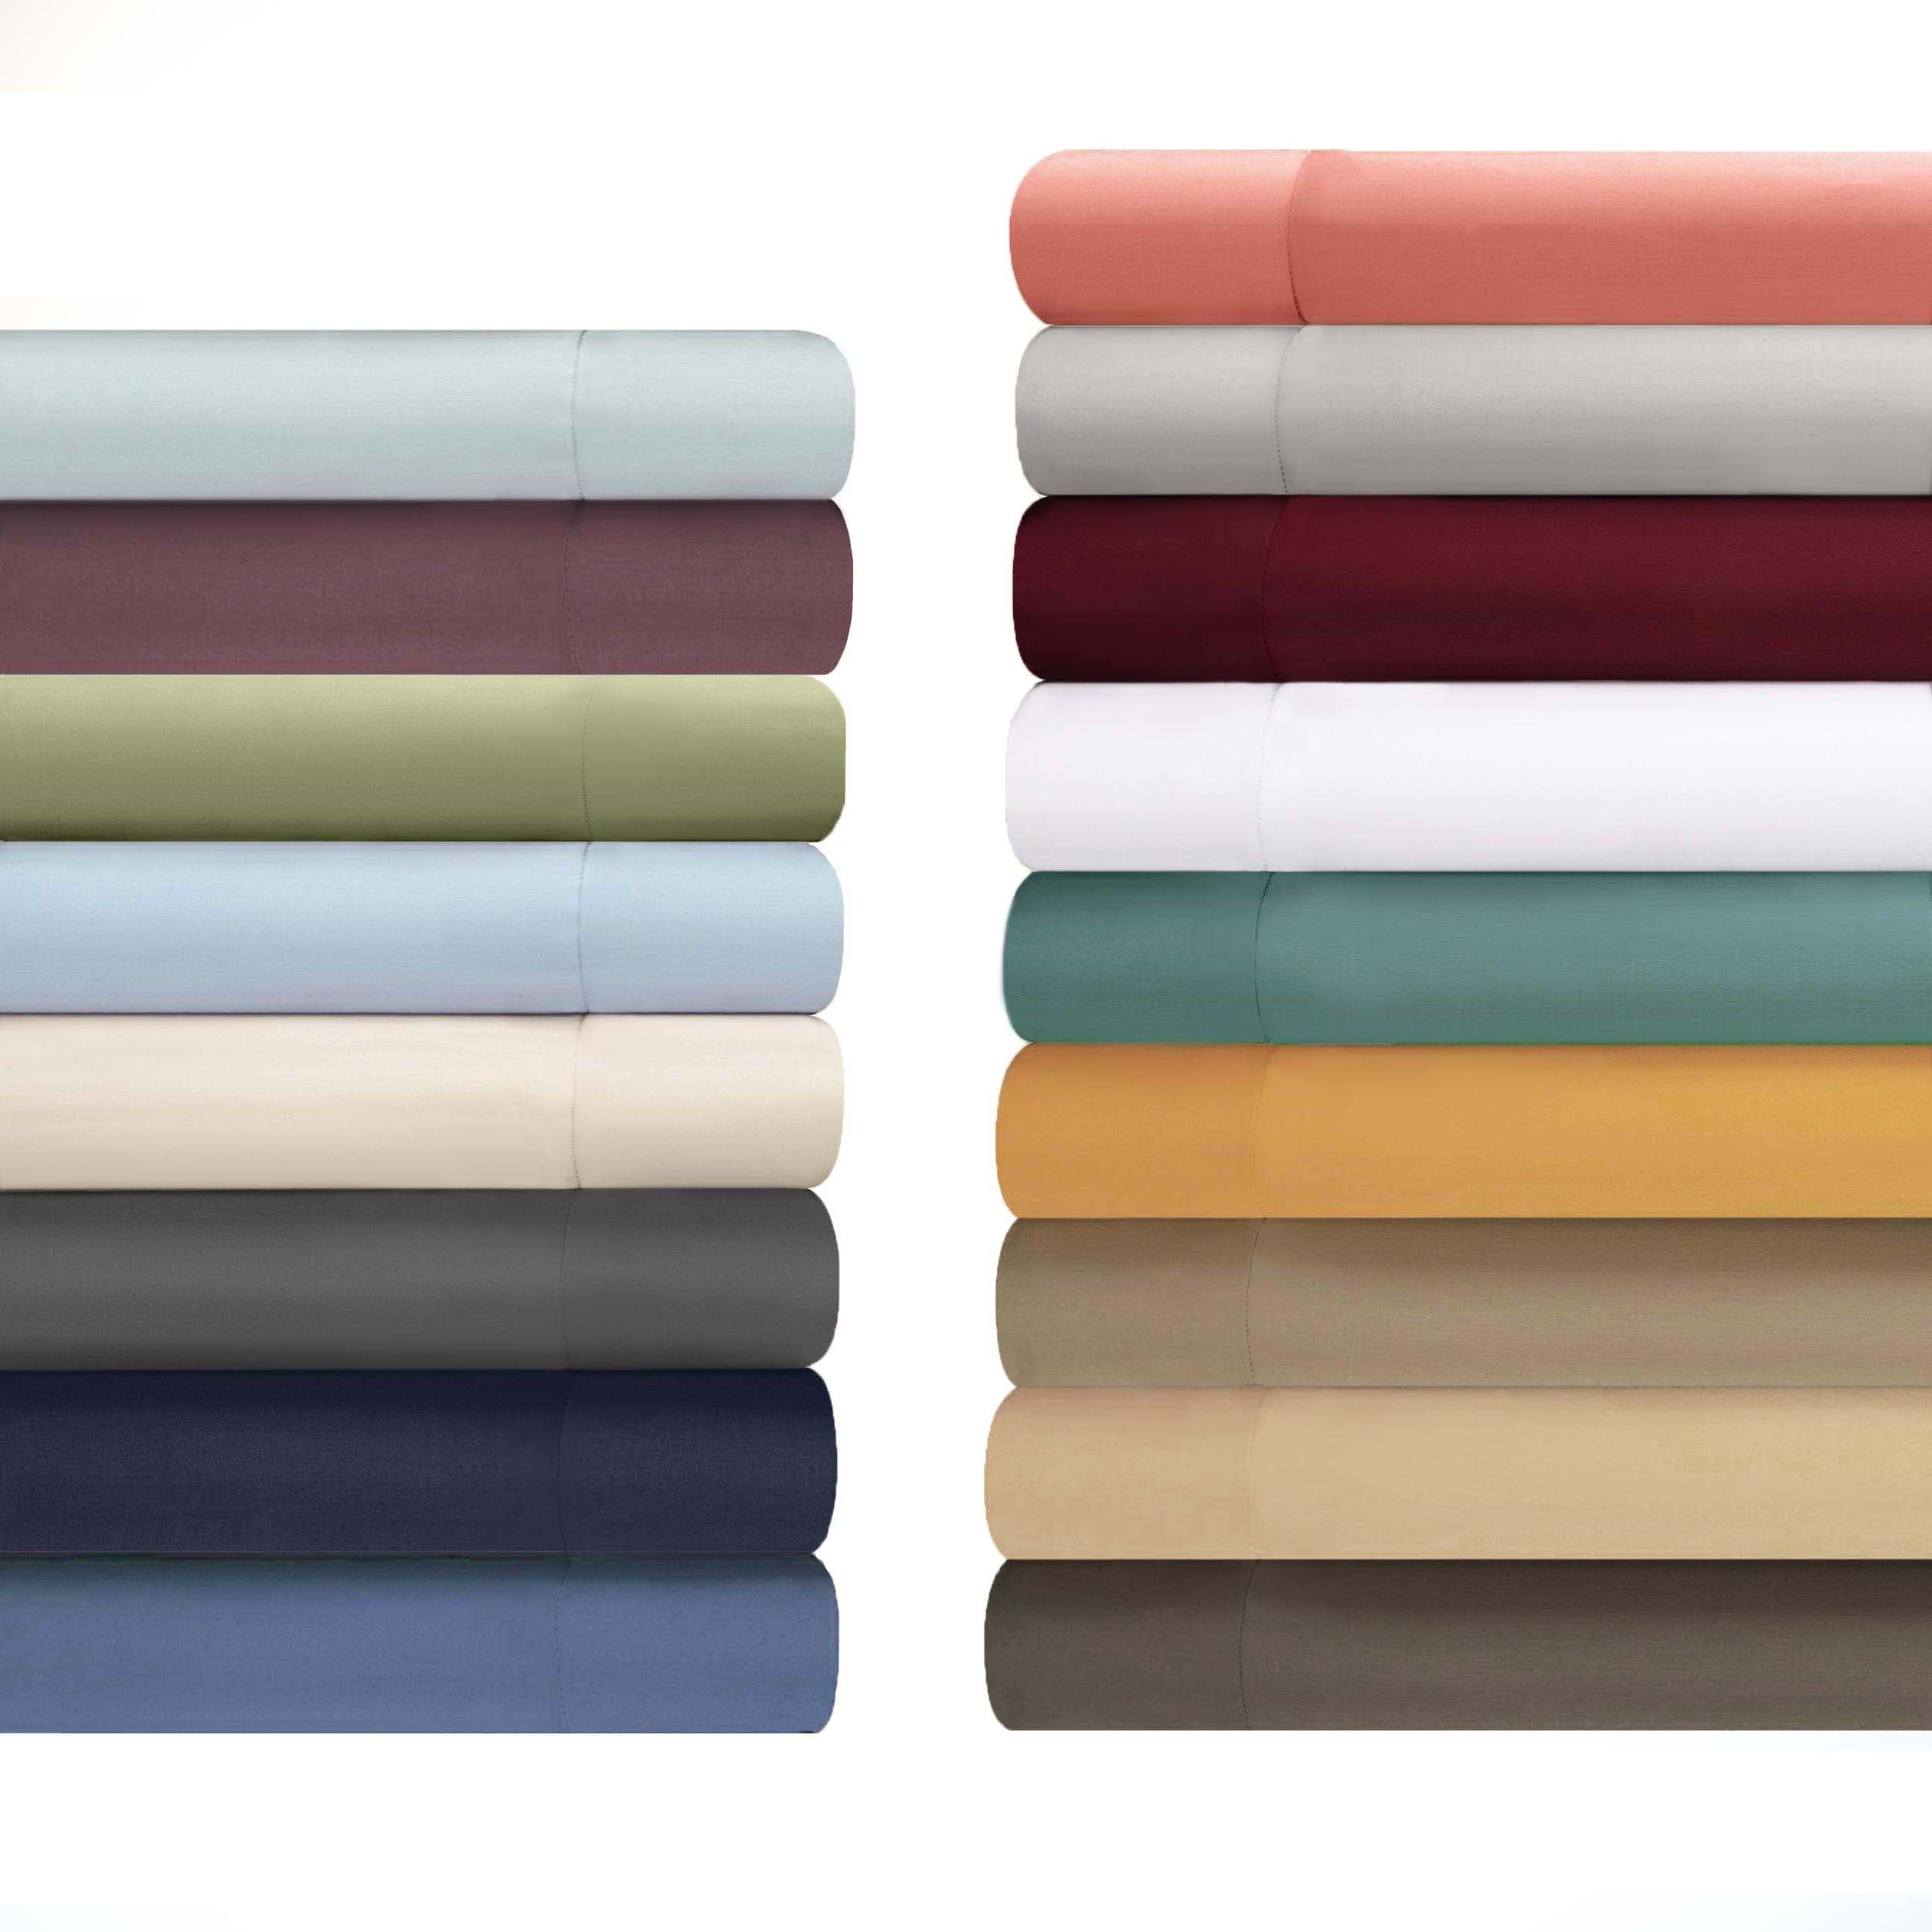 https://ak1.ostkcdn.com/images/products/is/images/direct/d1f9b67803e9c467ac9061340df38efb4149ce2d/Egyptian-Cotton-1000-Thread-Count-3-Piece-Duvet-Cover-Set-by-Superior.jpg